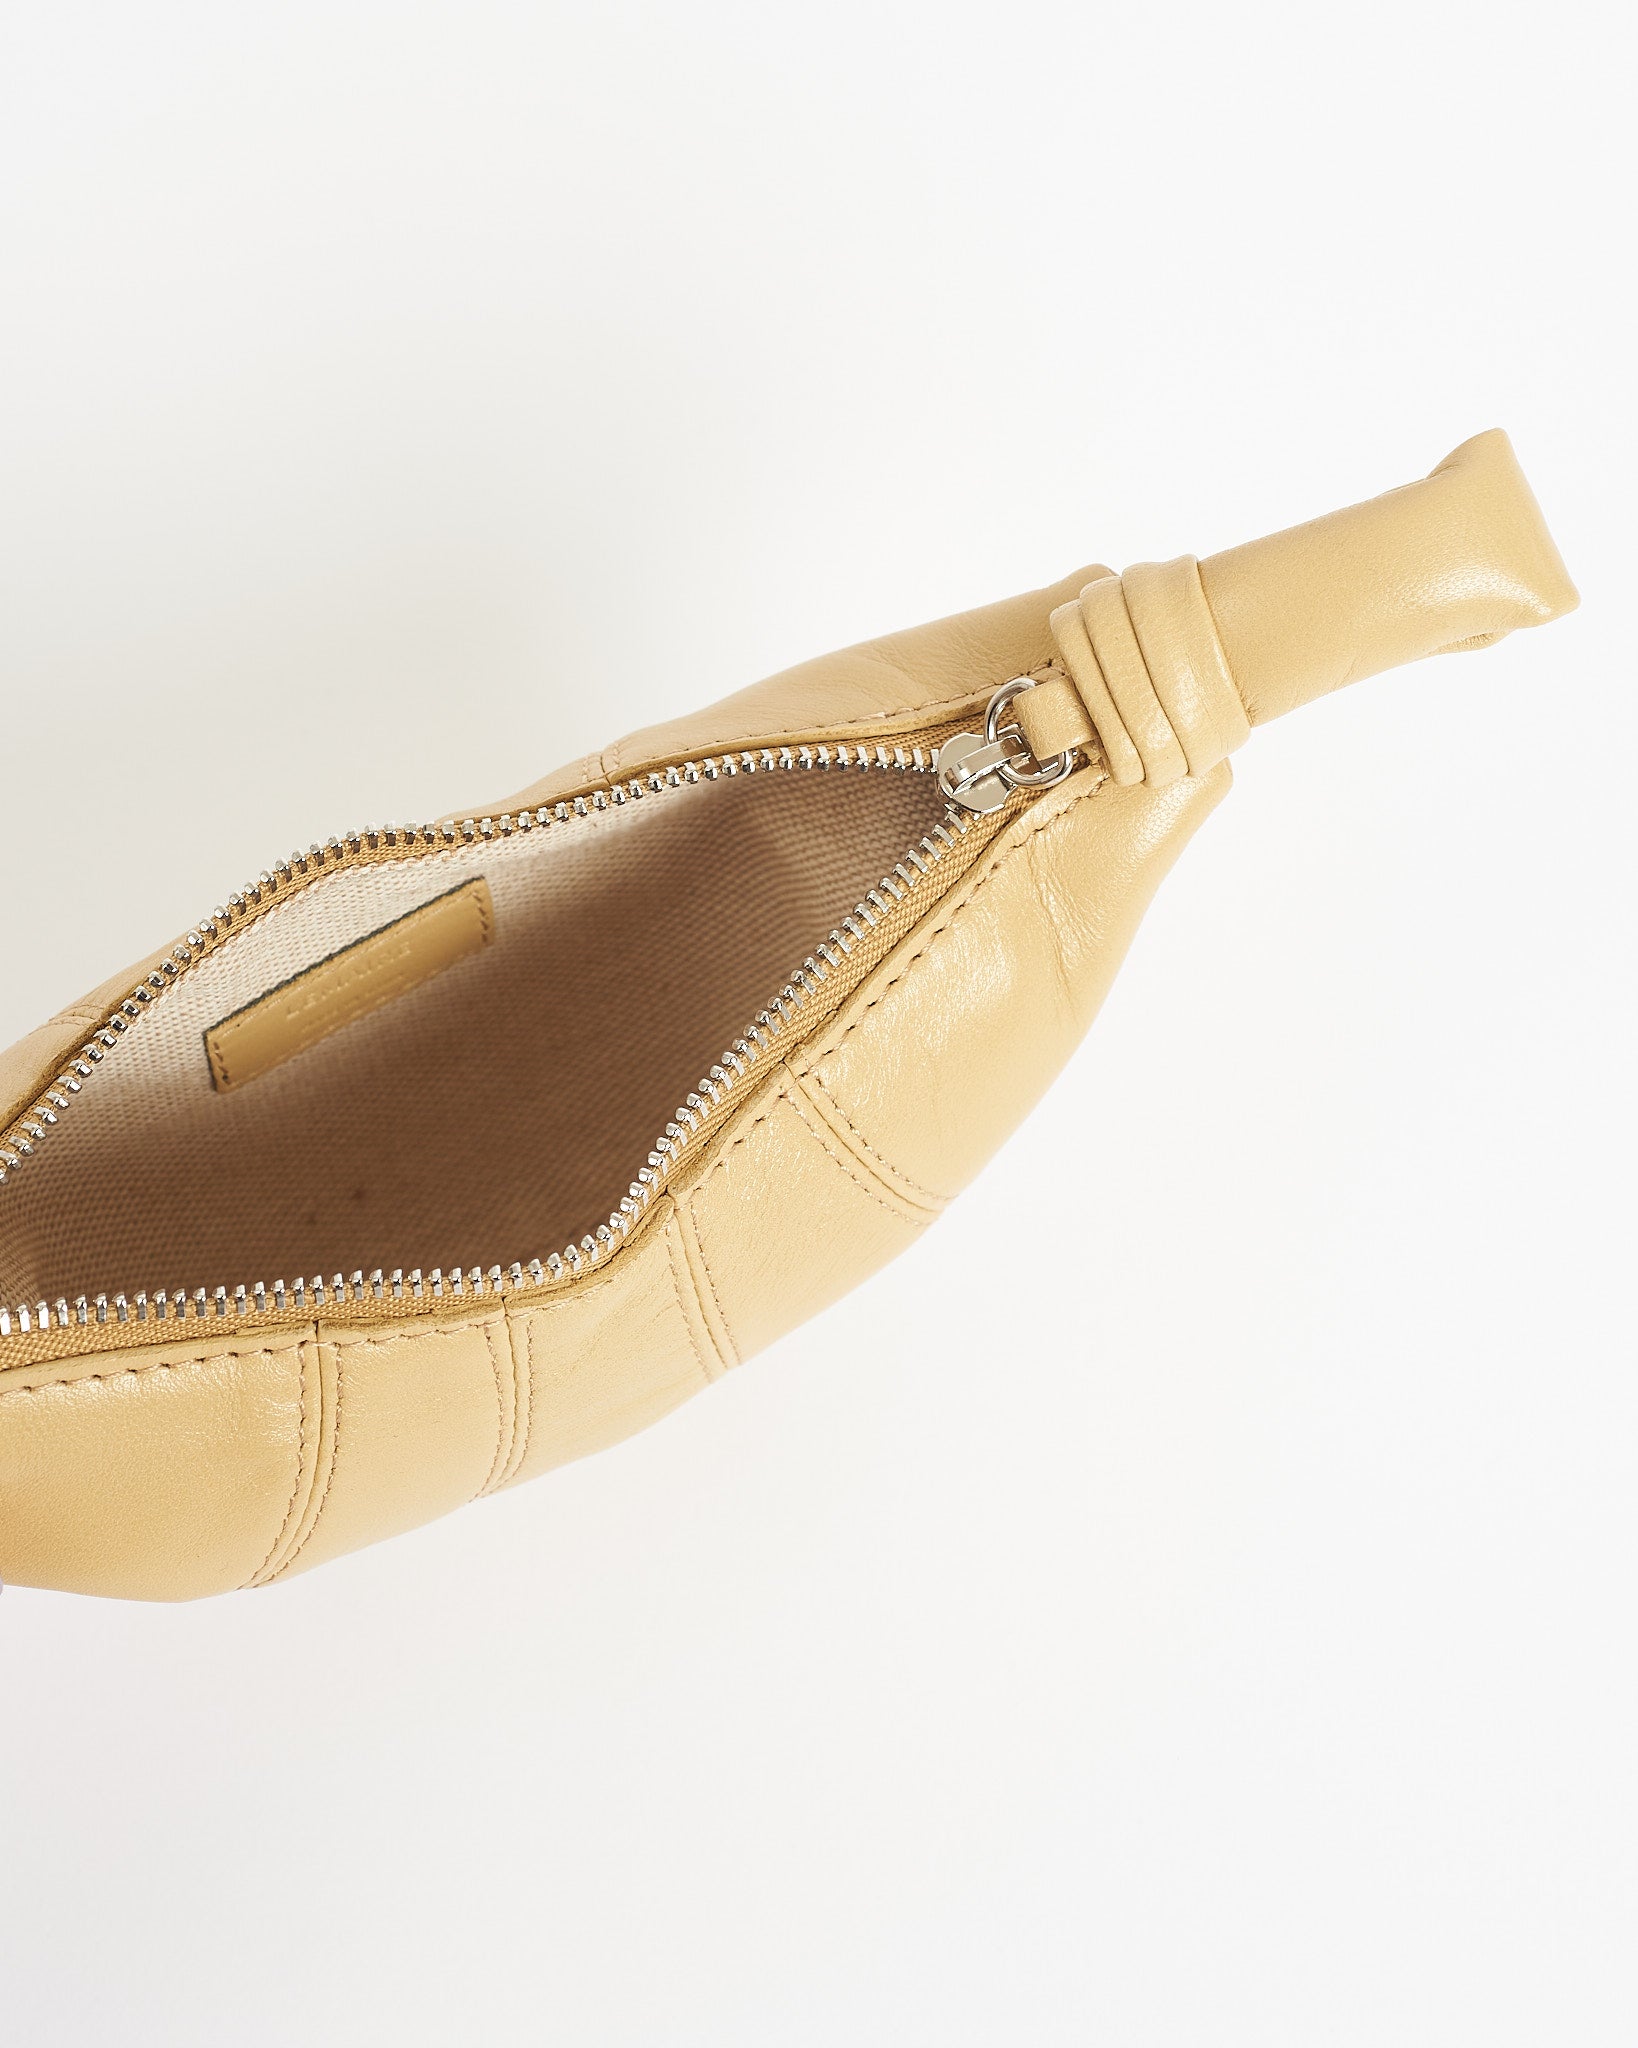 Croissant Coin Purse in Dune